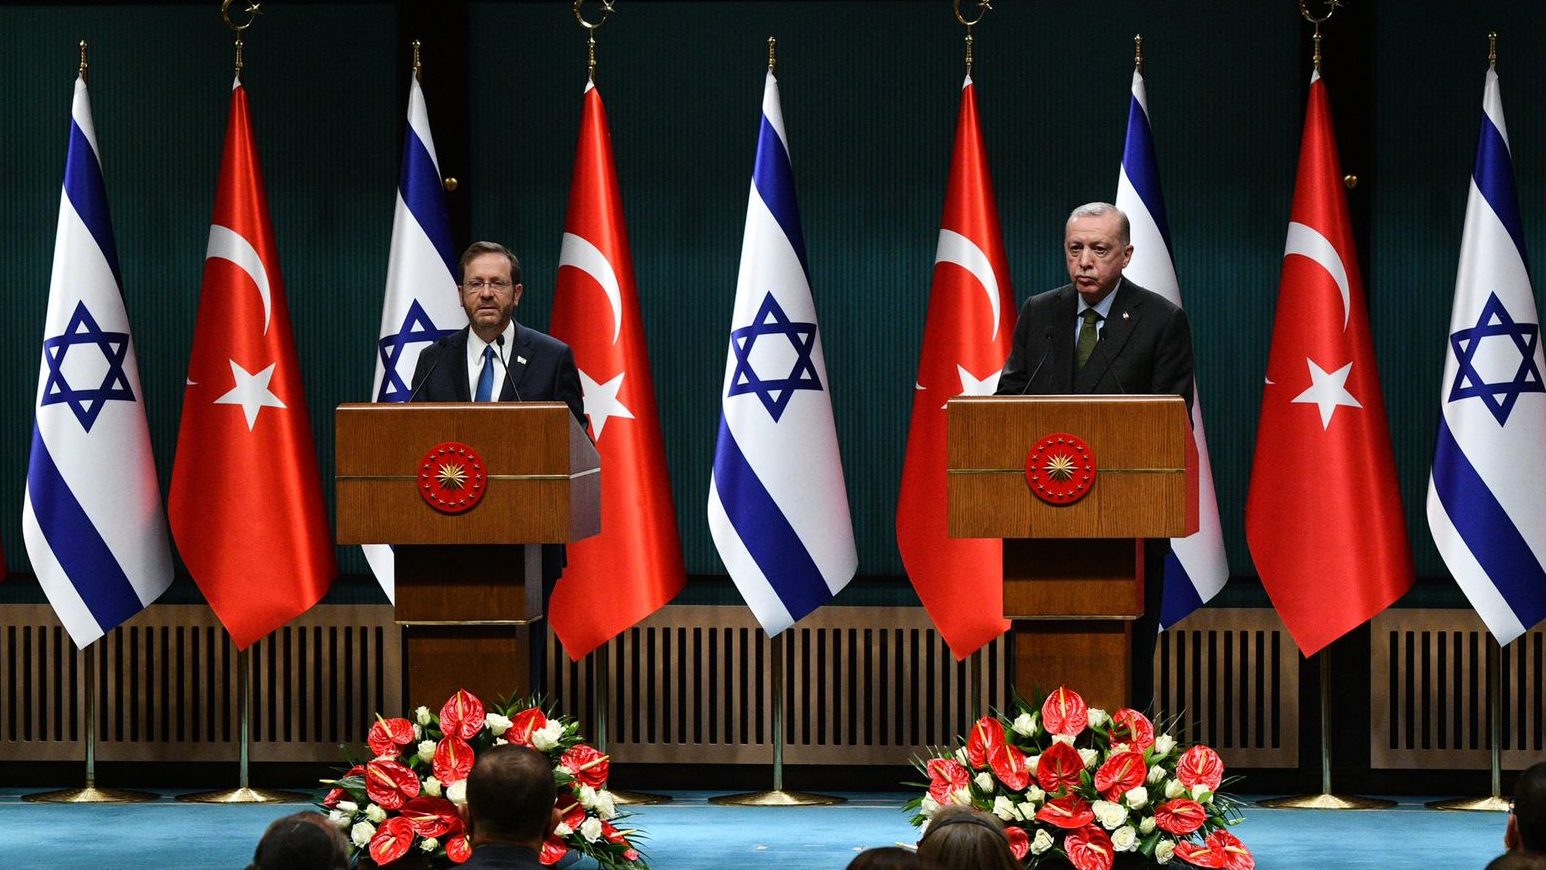 Leaders of Turkey, Israel Discuss Regional Stability After Full Diplomatic Relations Restored